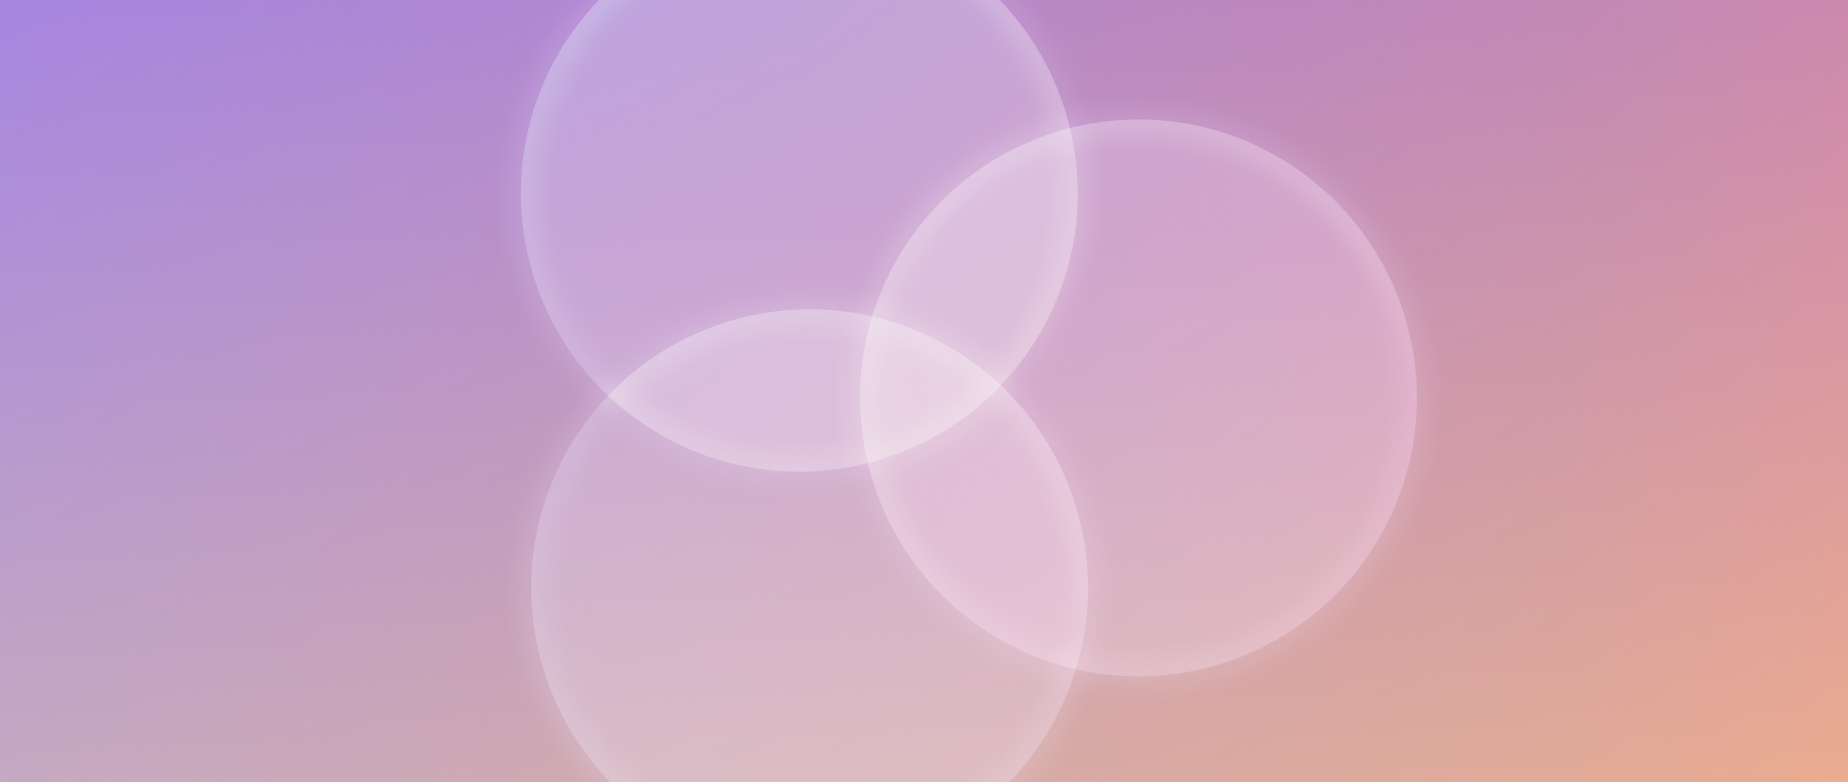 Three overlapping transparent circles on a light purple background.